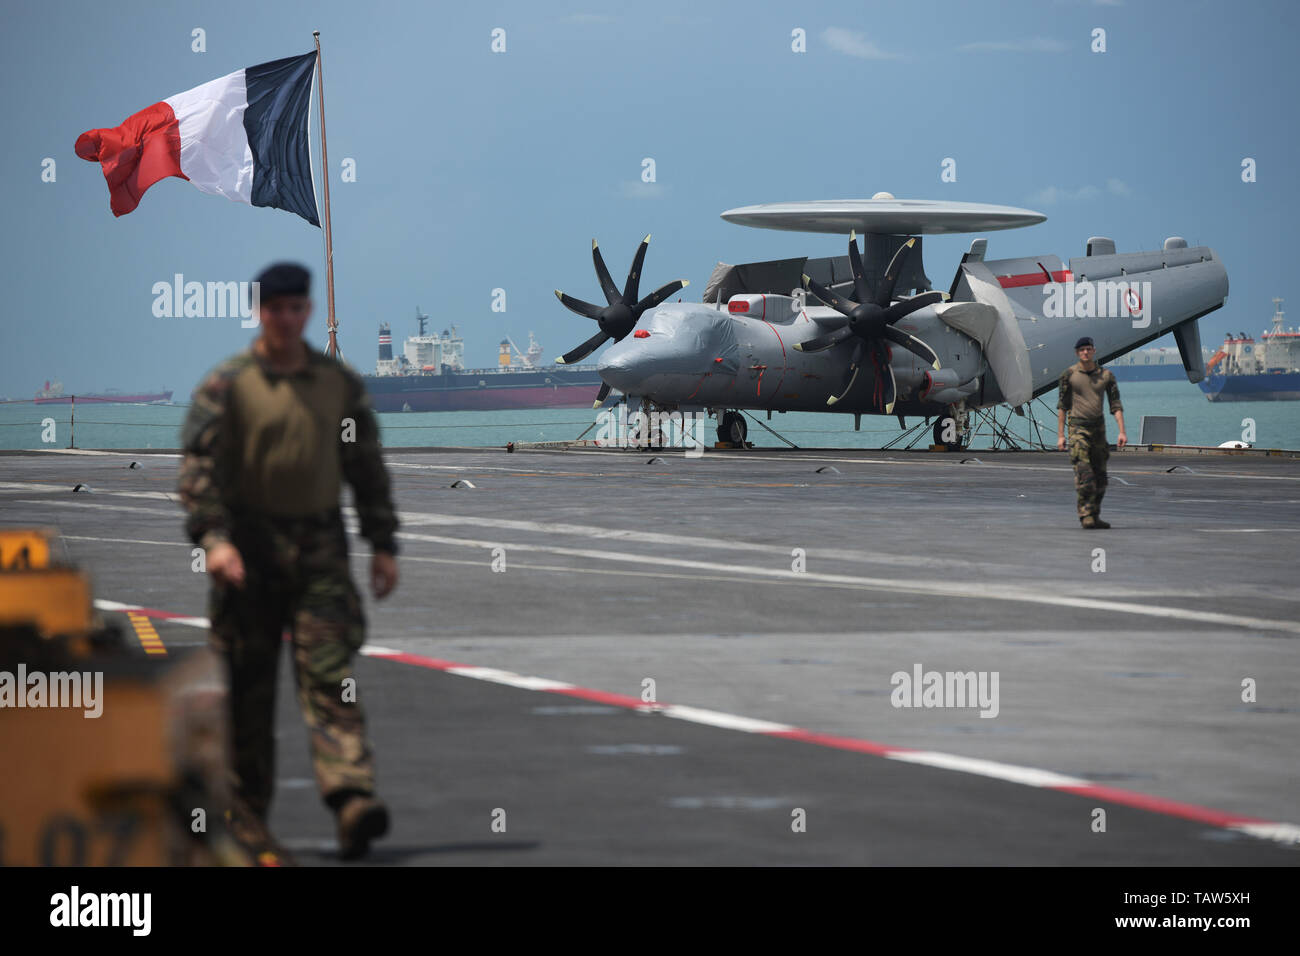 Singapore, Singapore. 28th May, 2019. An E-2C Hawkeye aircraft is seen on the flight deck of French aircraft carrier Charles de Gaulle docked at Changi Naval Base, Singapore, May 28, 2019. Credit: Then Chih Wey/Xinhua/Alamy Live News Stock Photo